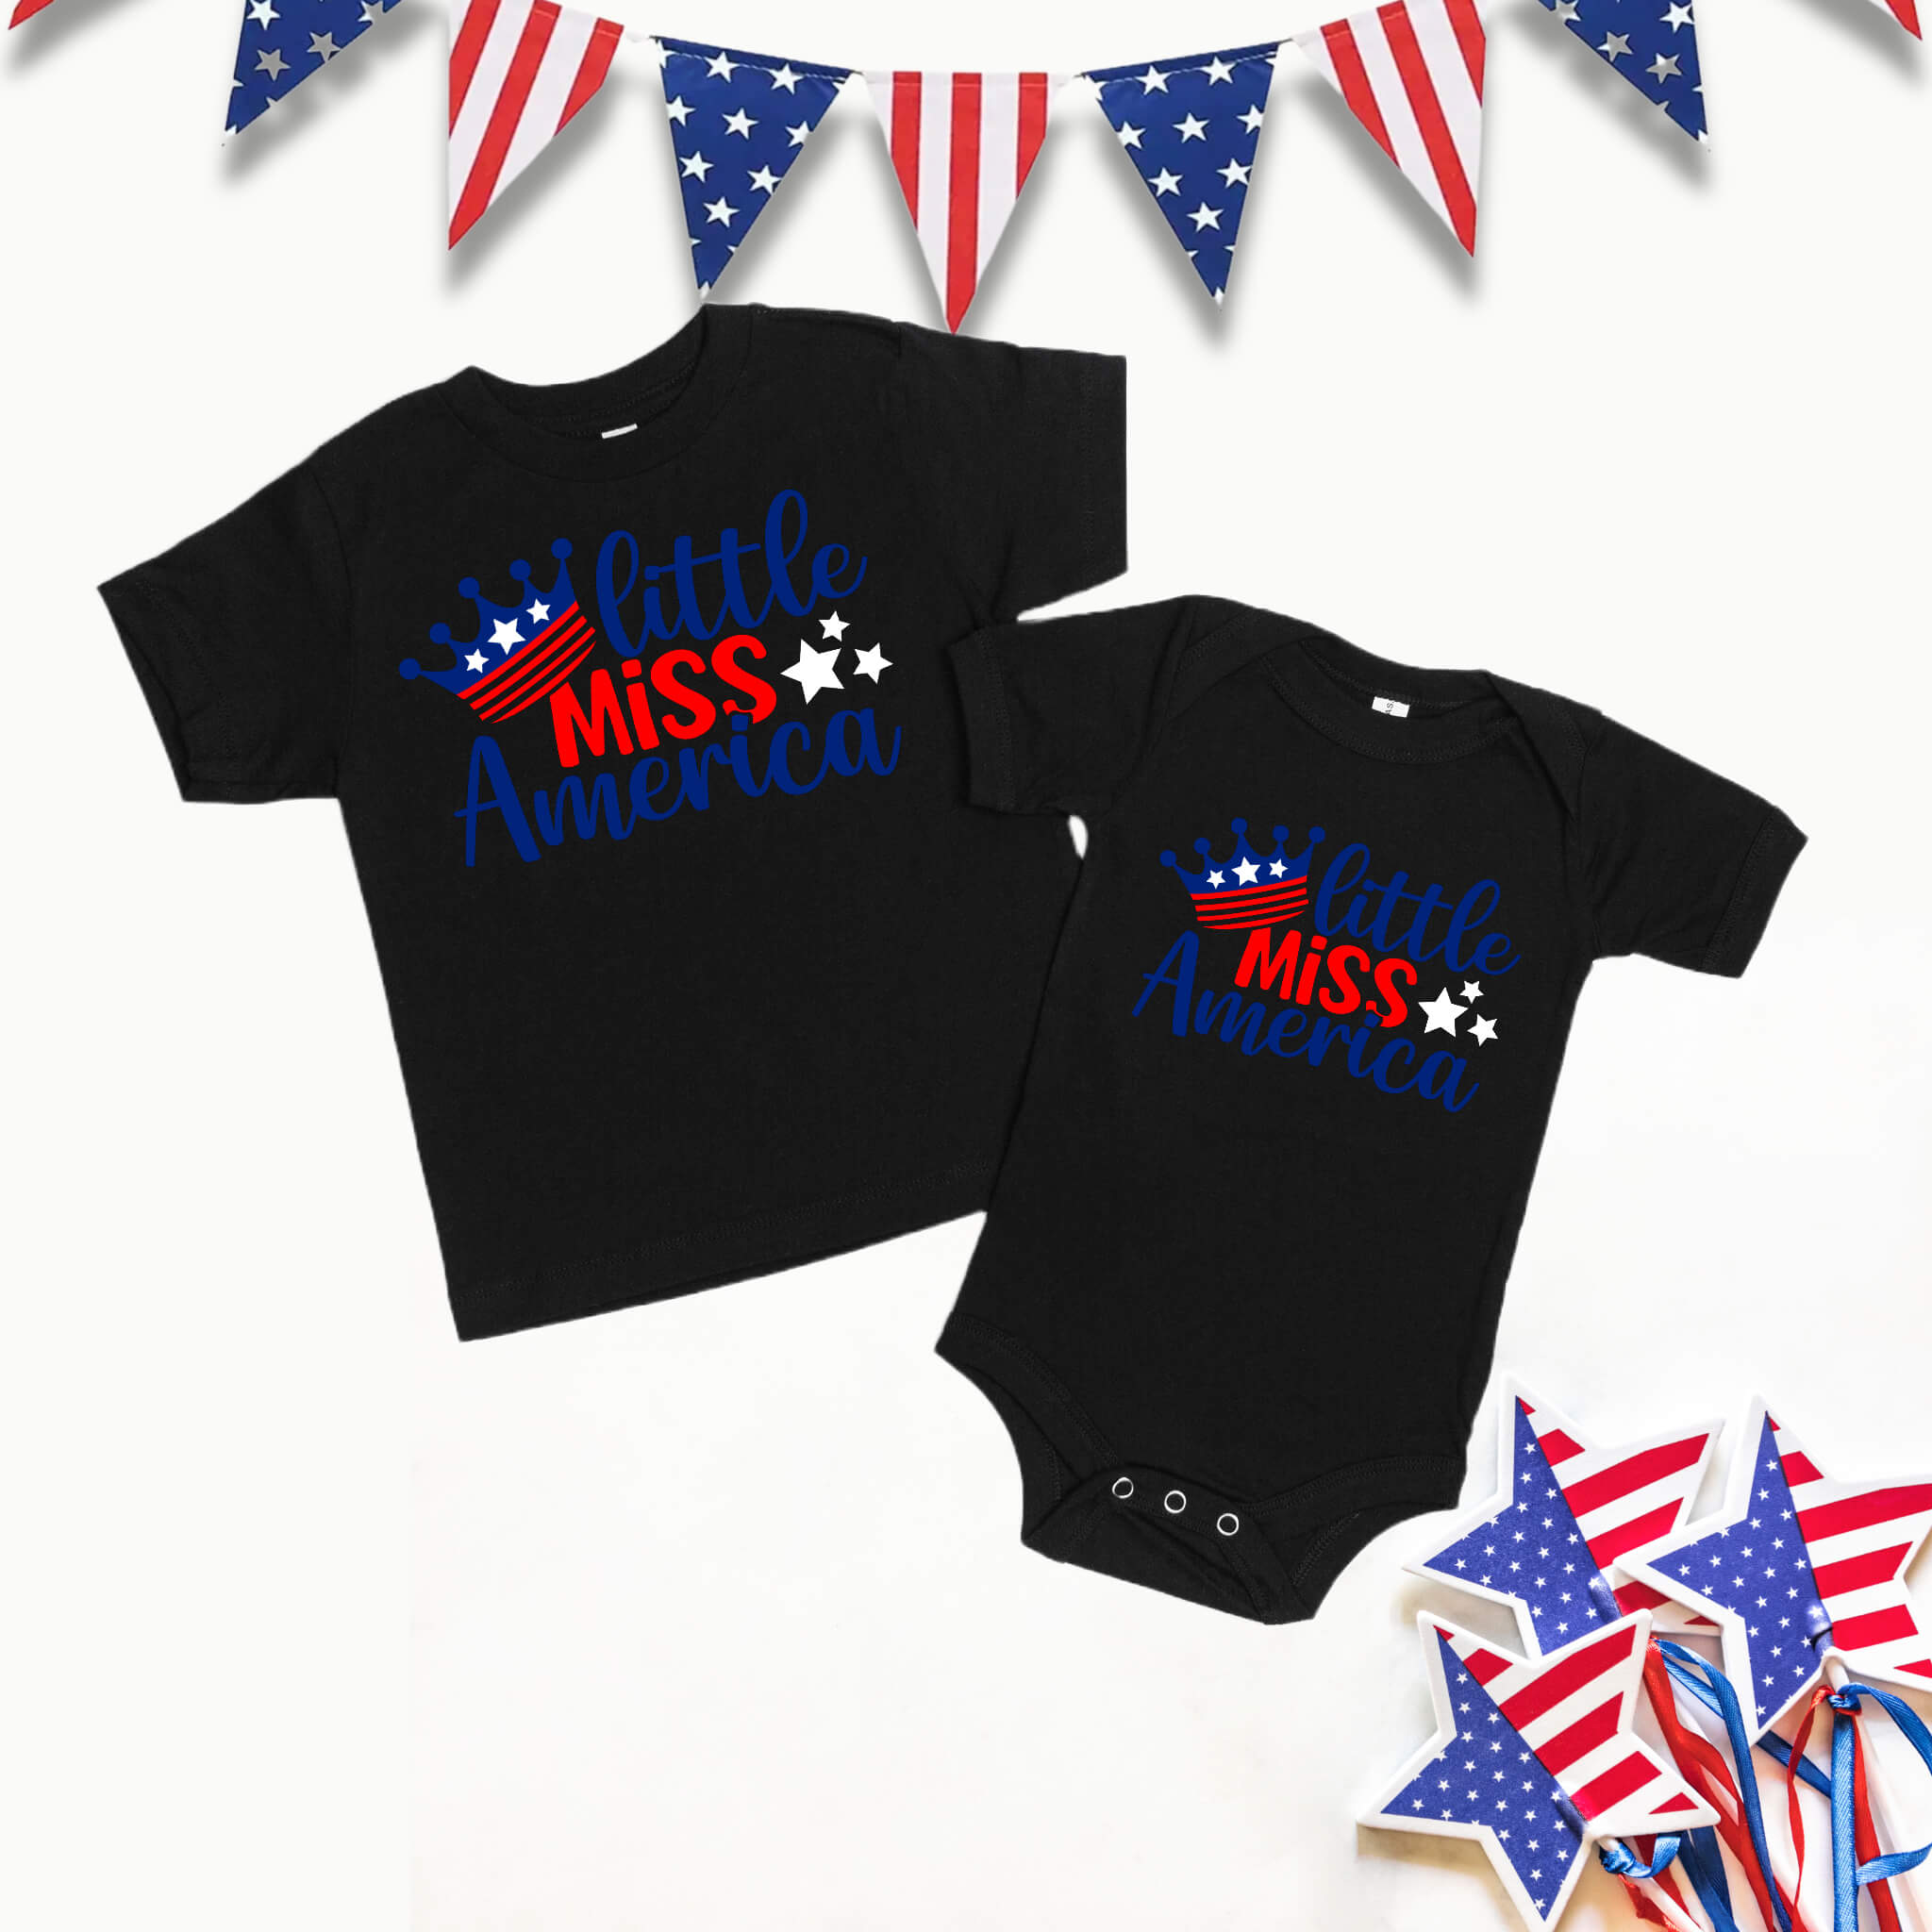 4th of July - Little Miss America Patriotic Girl’s Graphic Print Onesie / T-Shirt